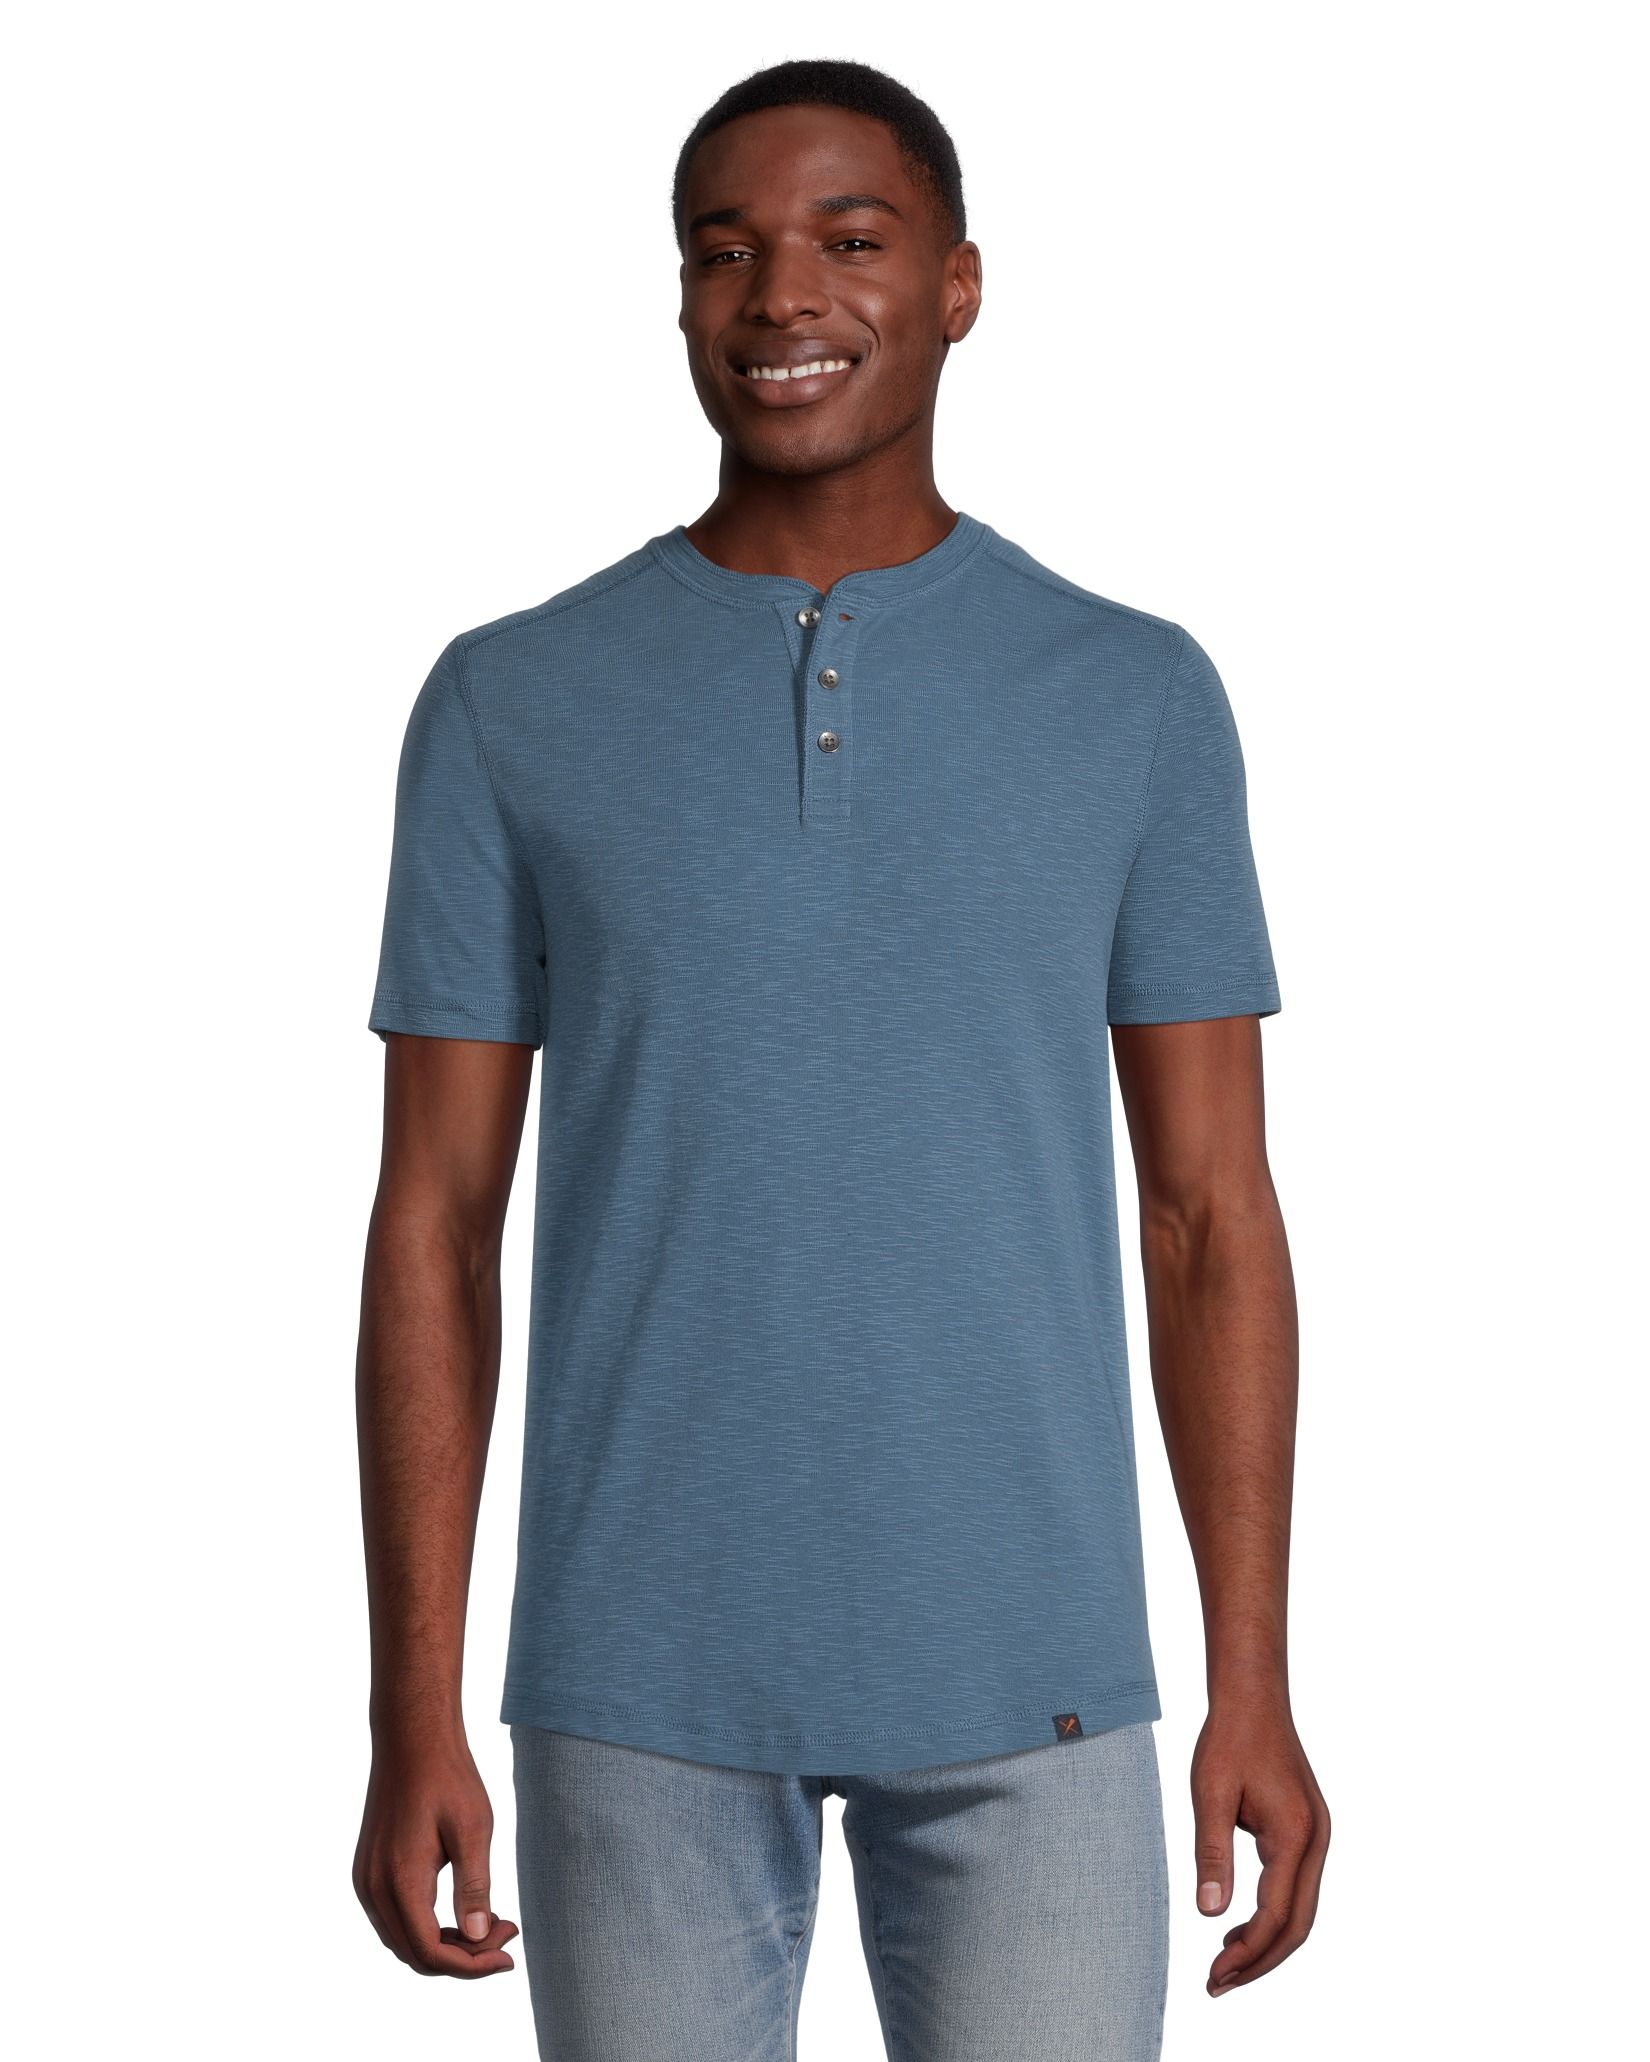 Men's 3-Button Thermal Waffle-Knit Henley Shirts ( Sizes, S-5XL